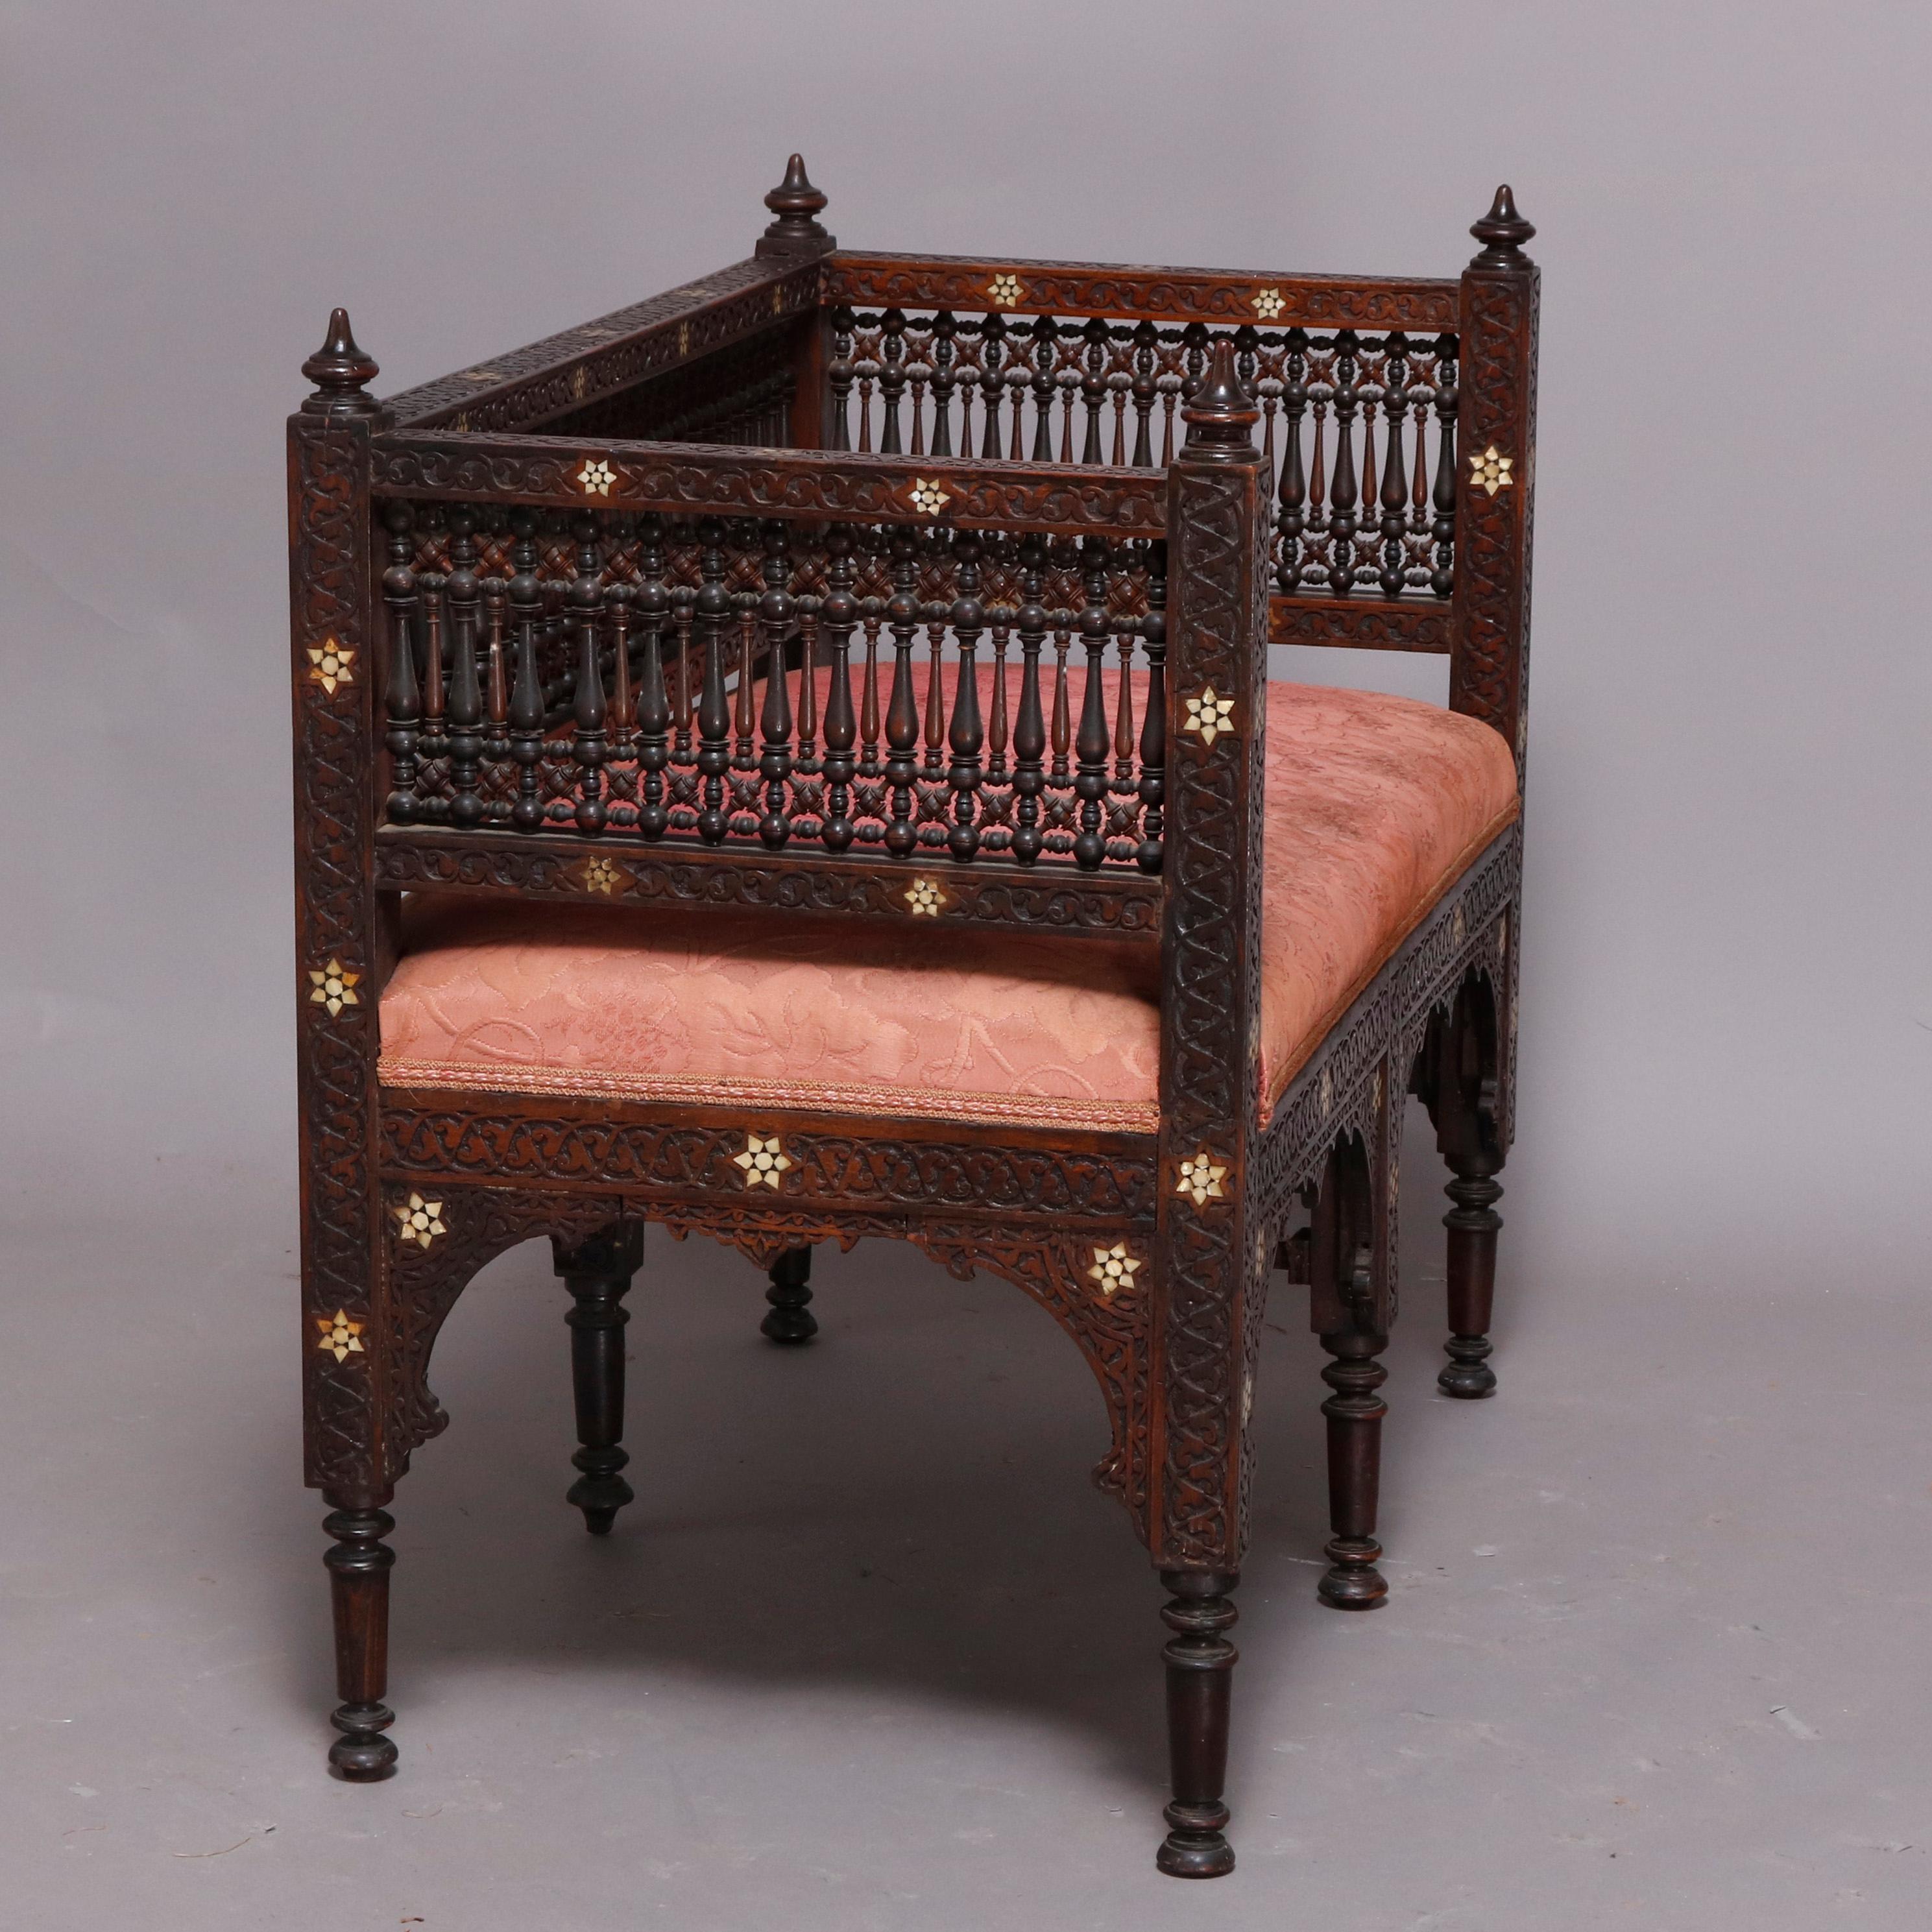 Syrian Orientalist Mother of Pearl Inlaid & Carved Hardwood Settee 19th Century 1